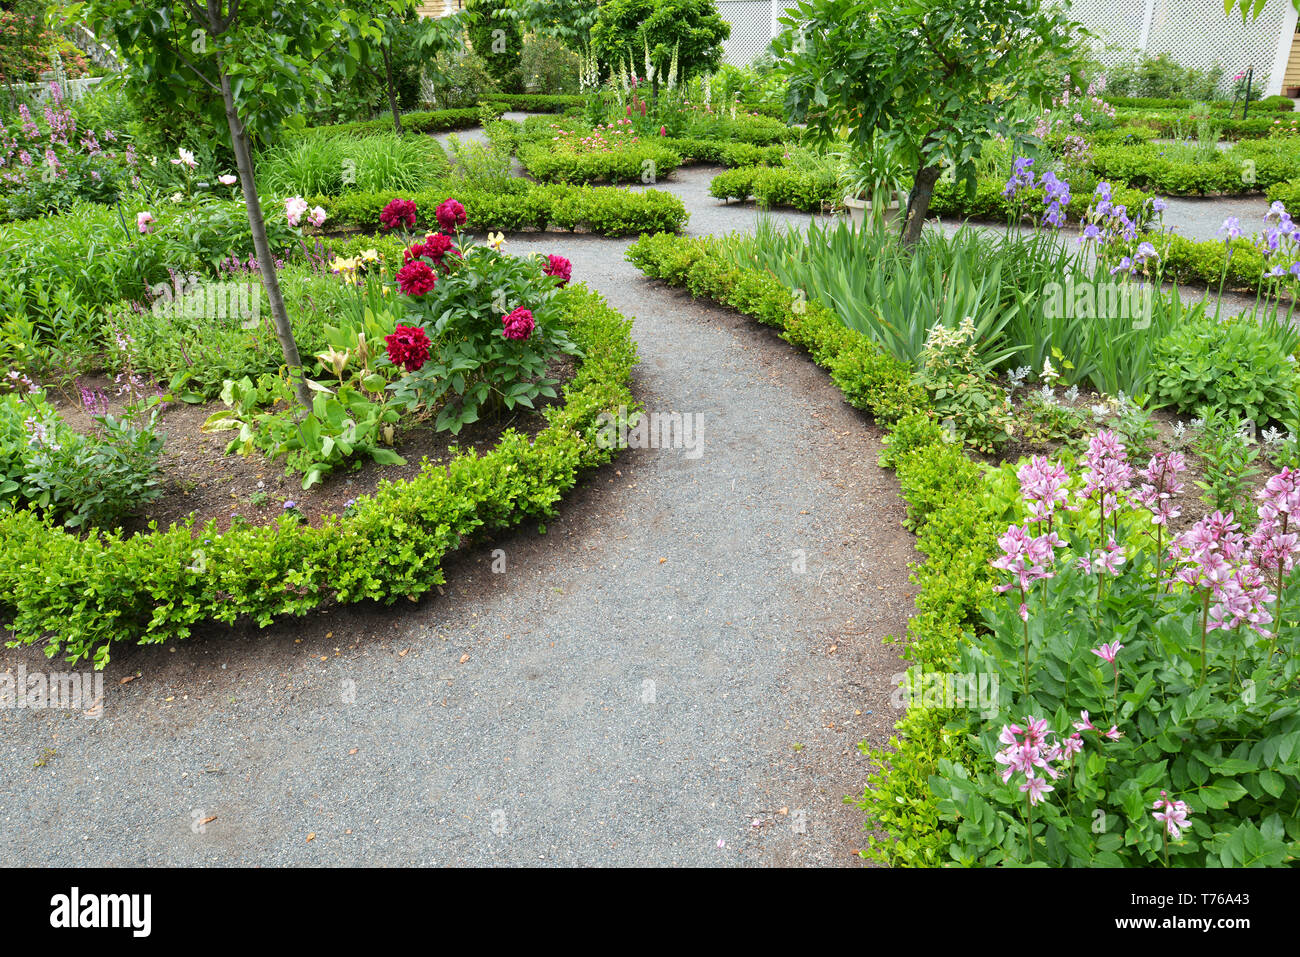 Landscape design. Crushed stone paths and low hedge borders in formal, old-fashioned garden Stock Photo